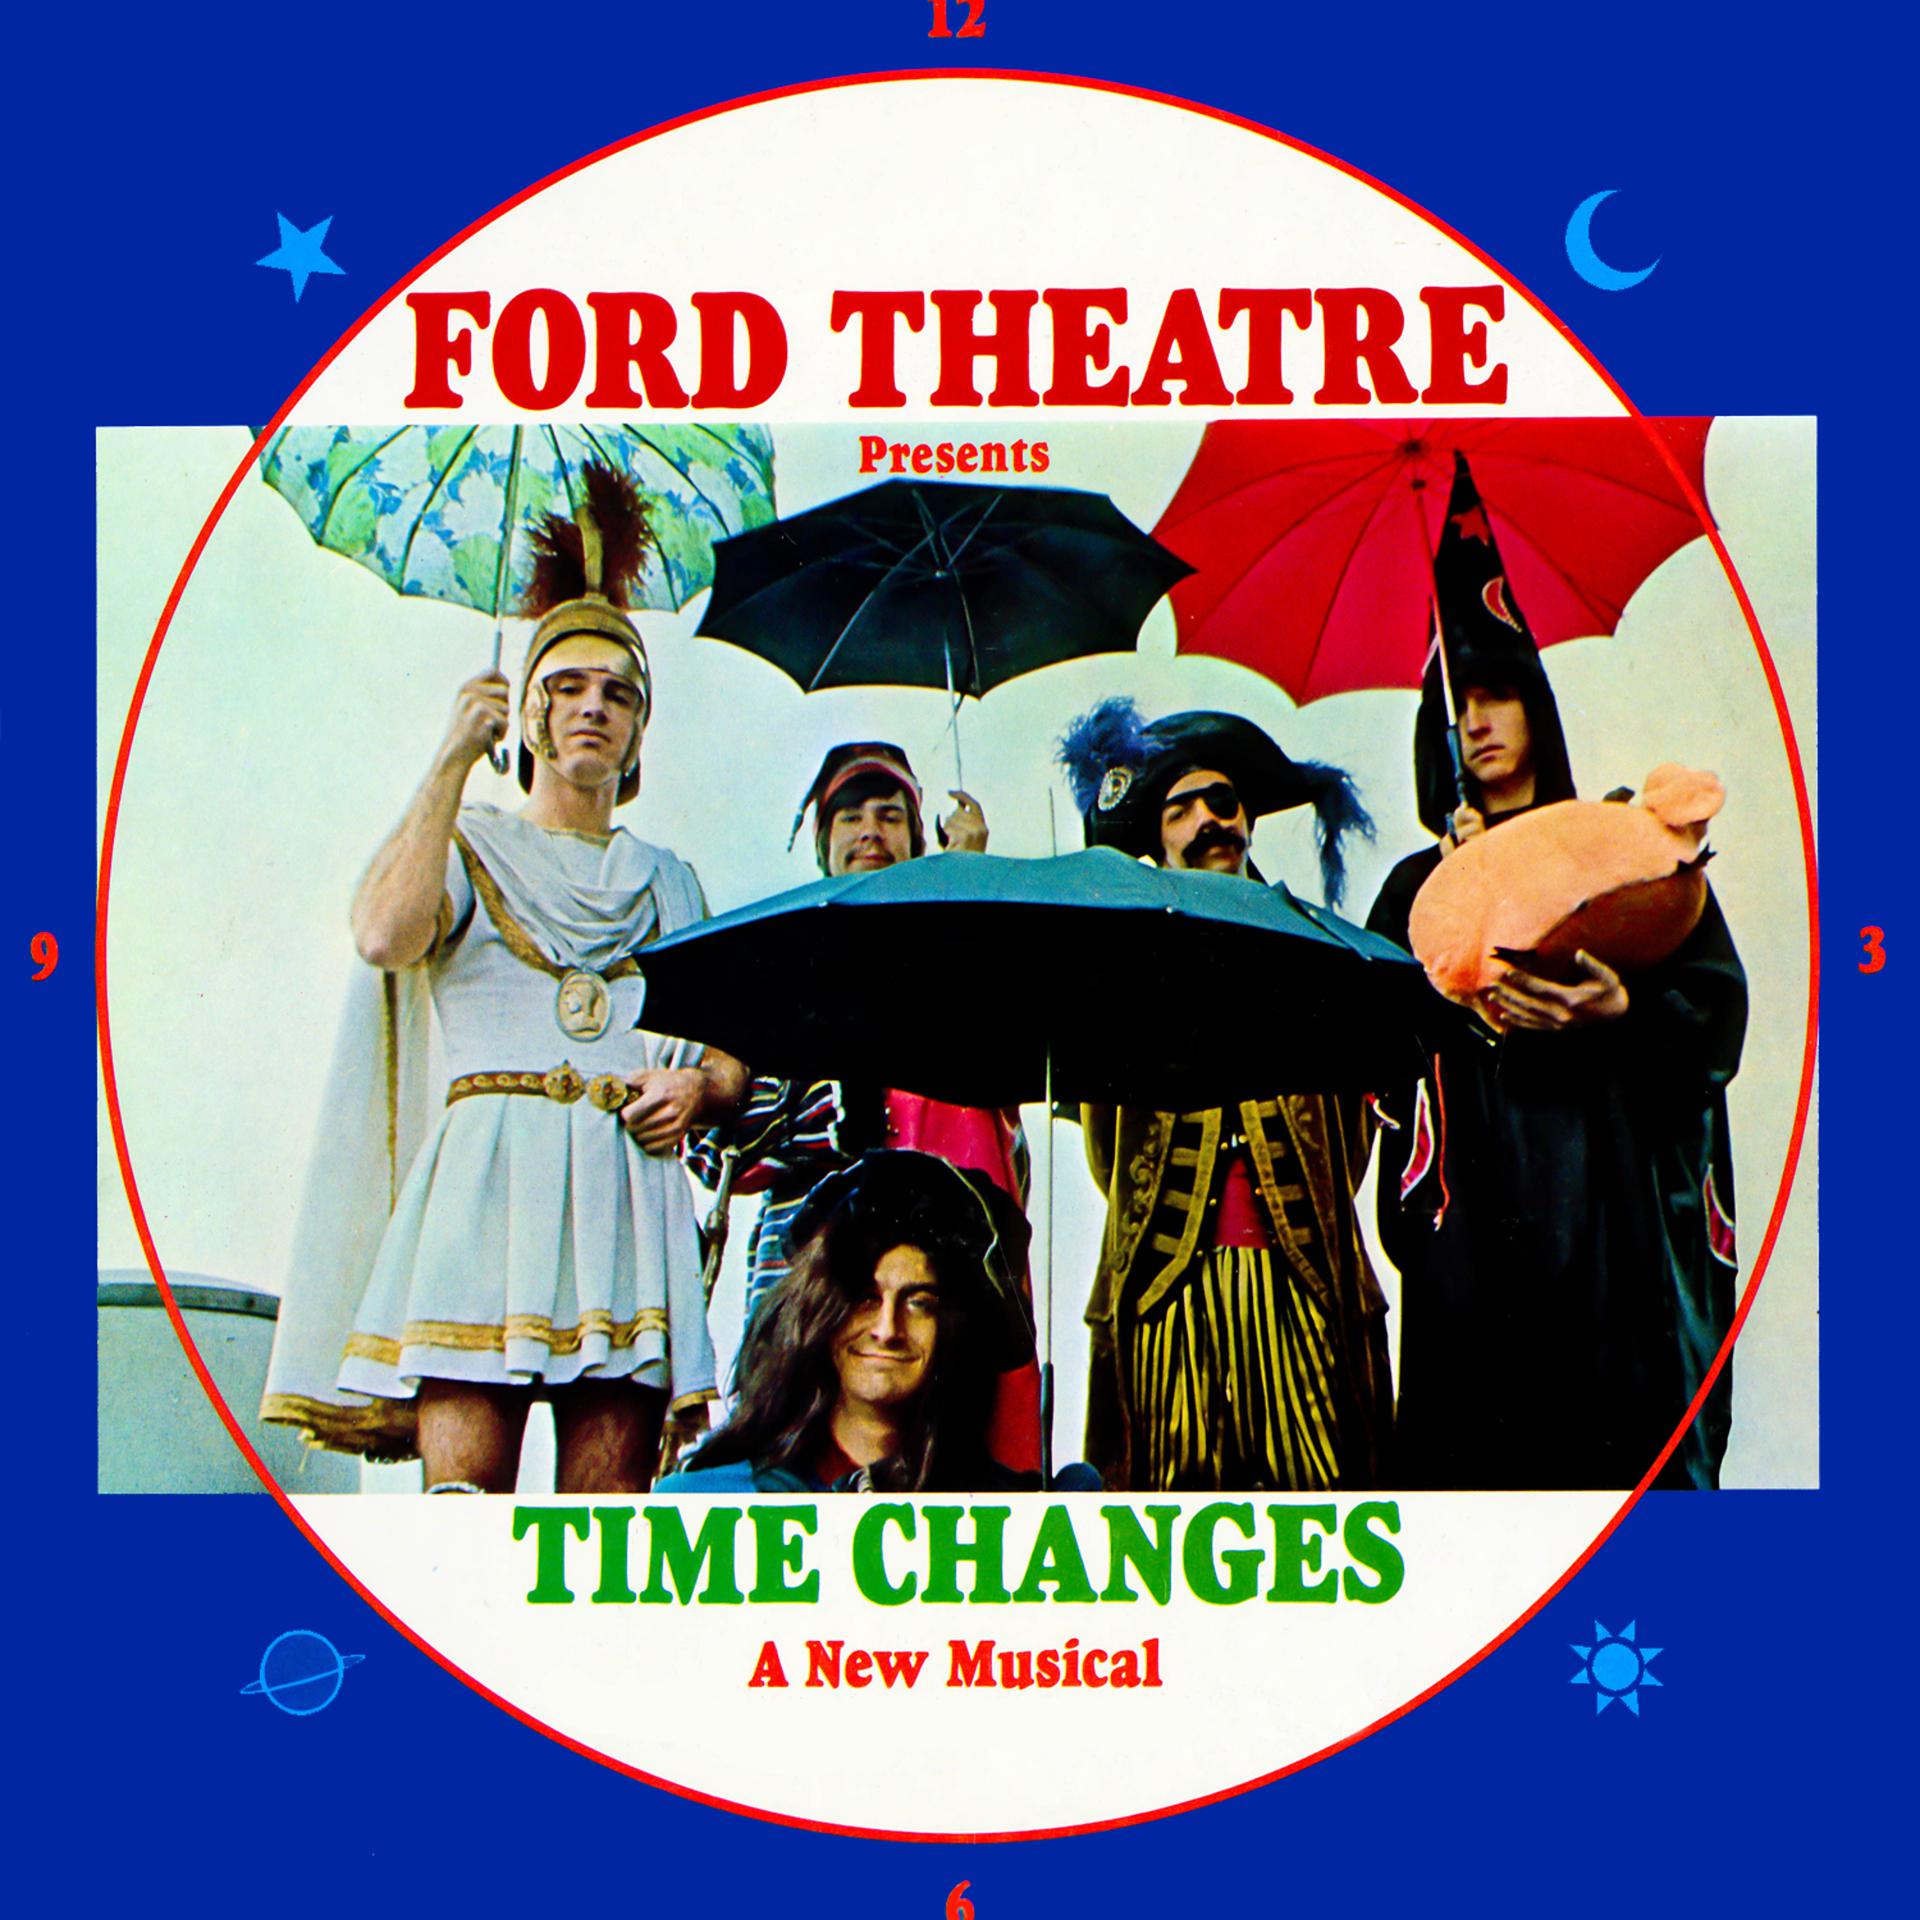 Theater песня. Ford Theatre Band time changes - 1969. Ford Theatre Band Trilogy for the masses - 1968. Ford Theatre - Trilogy for the masses. Альбом Форд.